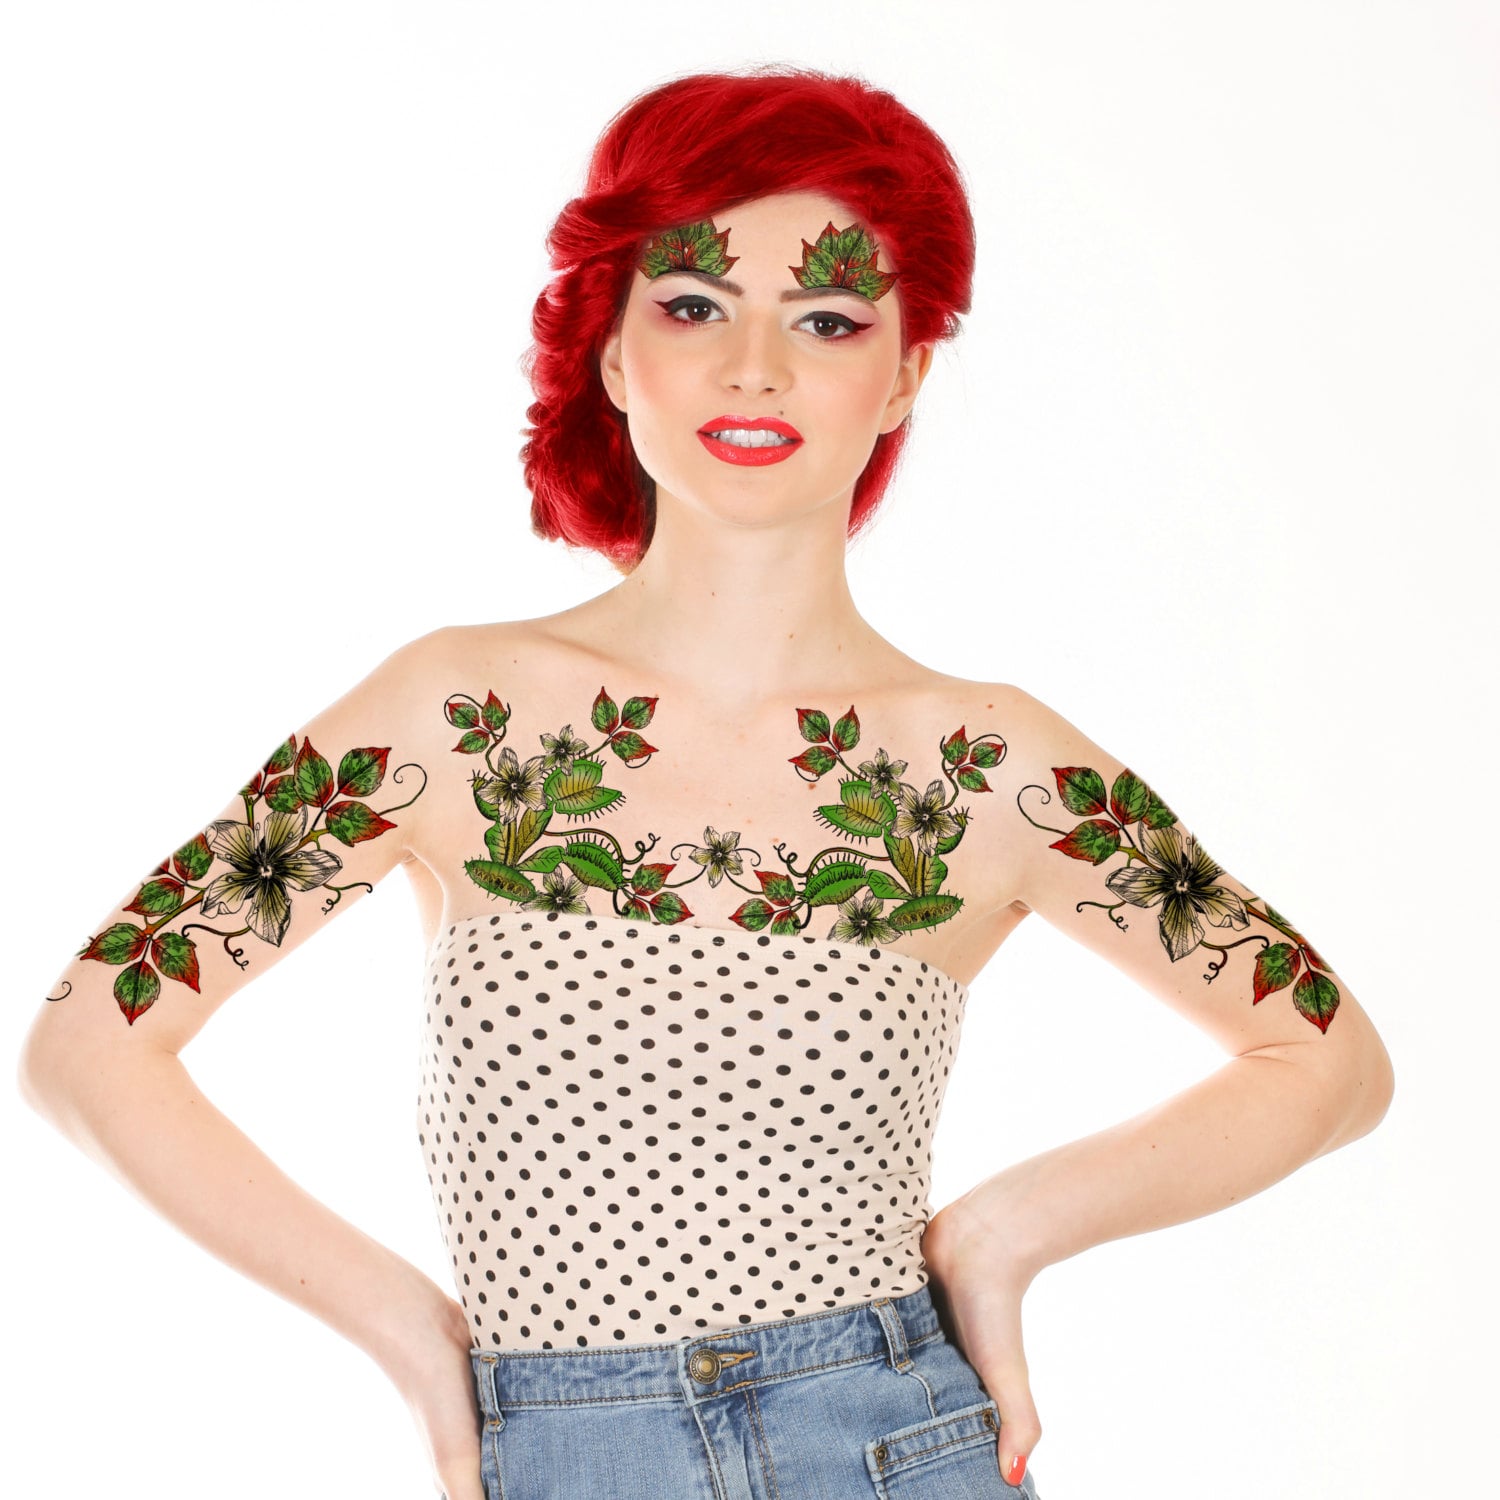  Poison Ivy for Eluith  Email kathleensanderstattooyahoocom  Booking Info  available tattoos in highlights  Instagram